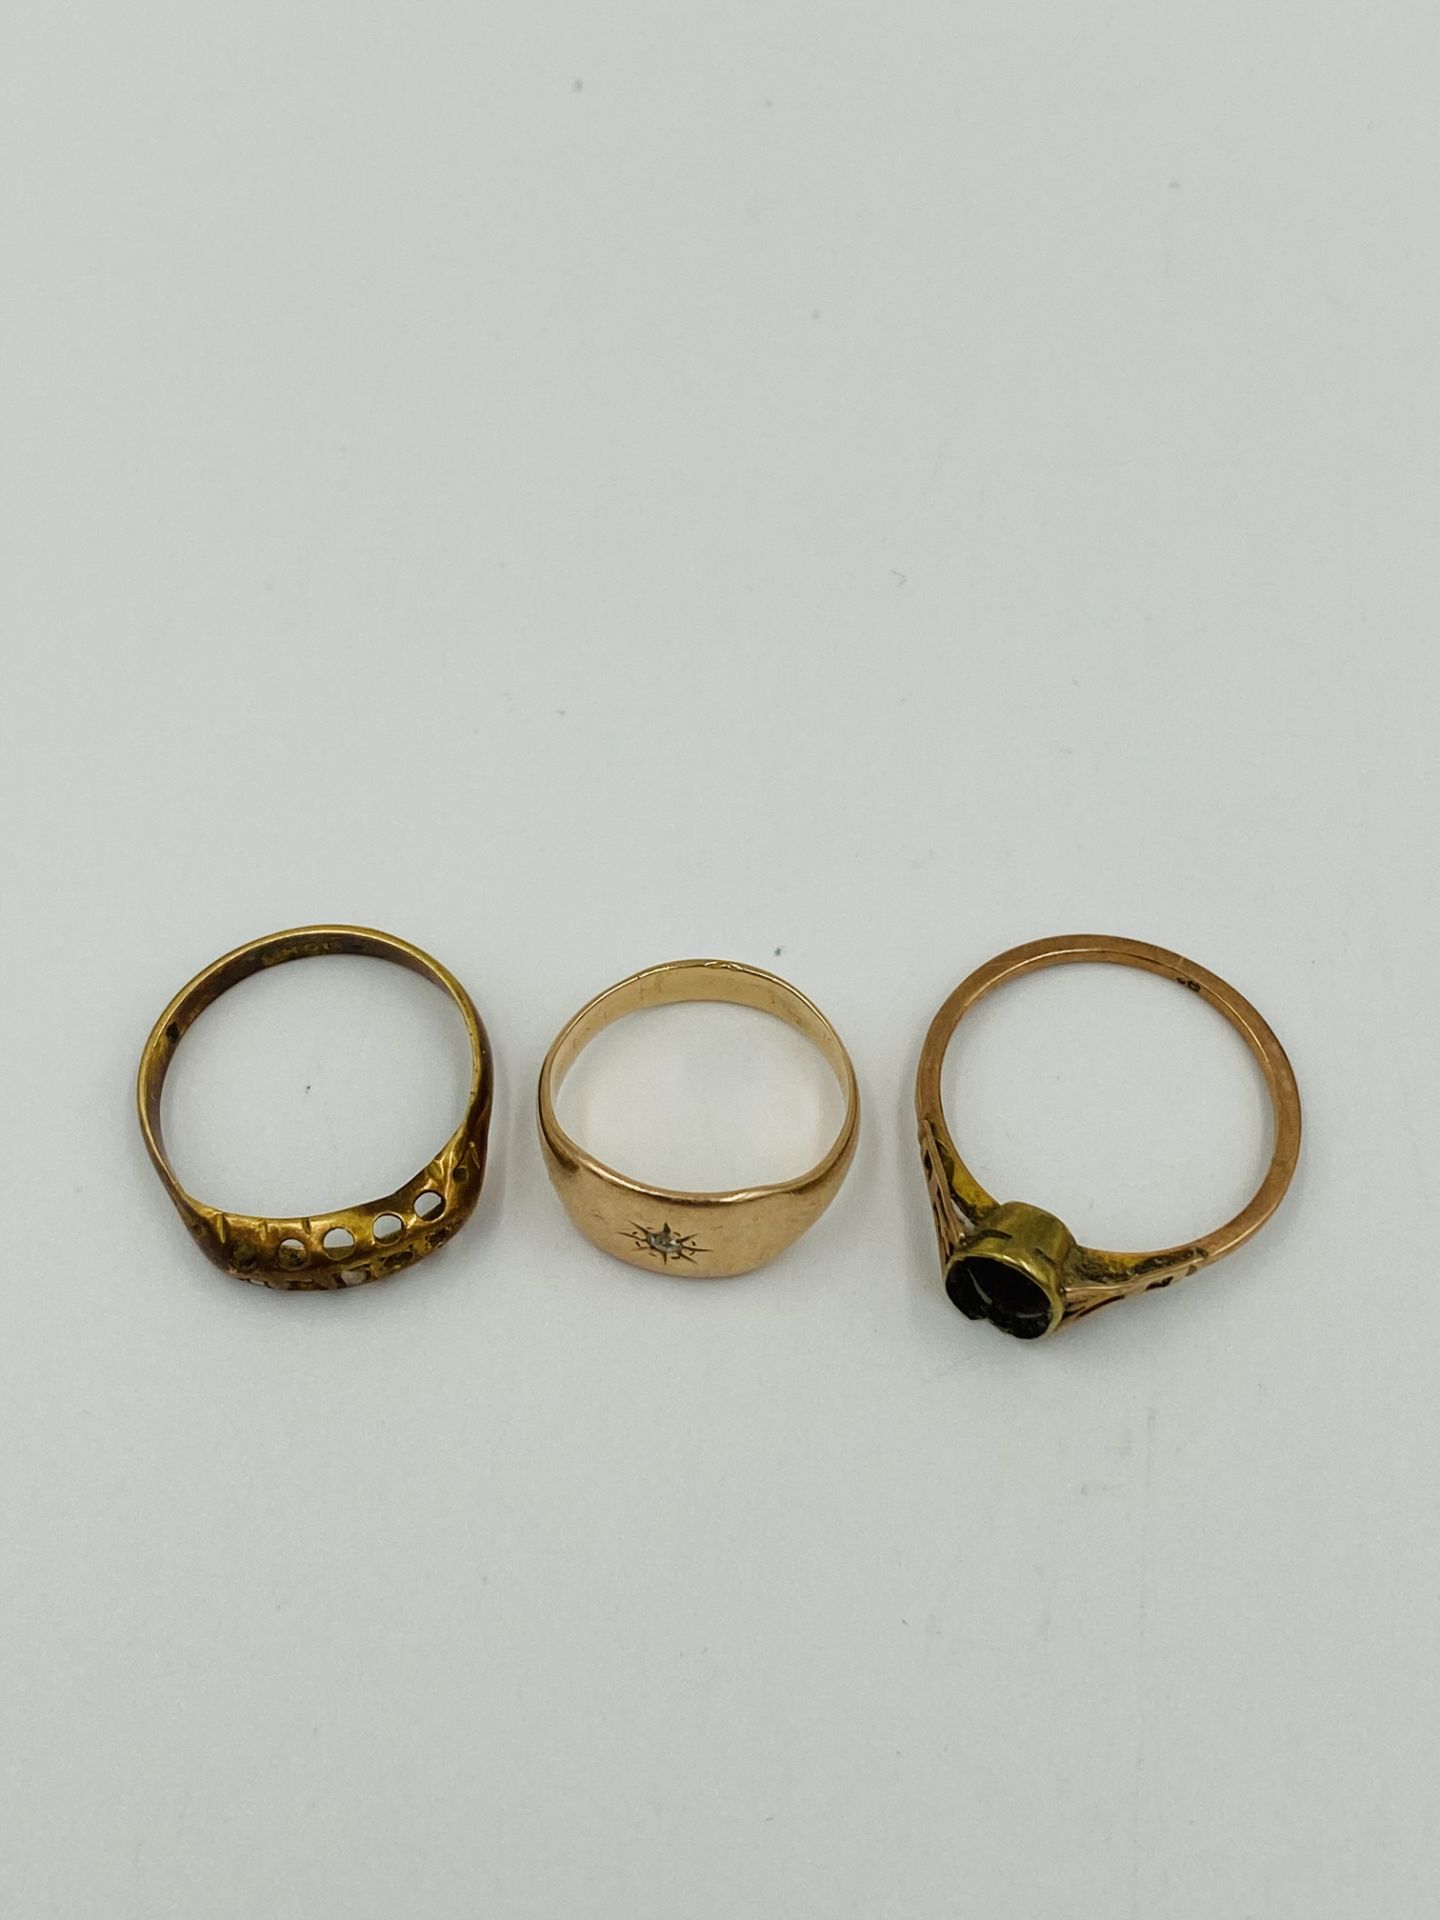 Two gold rings together with a yellow metal ring - Image 2 of 3